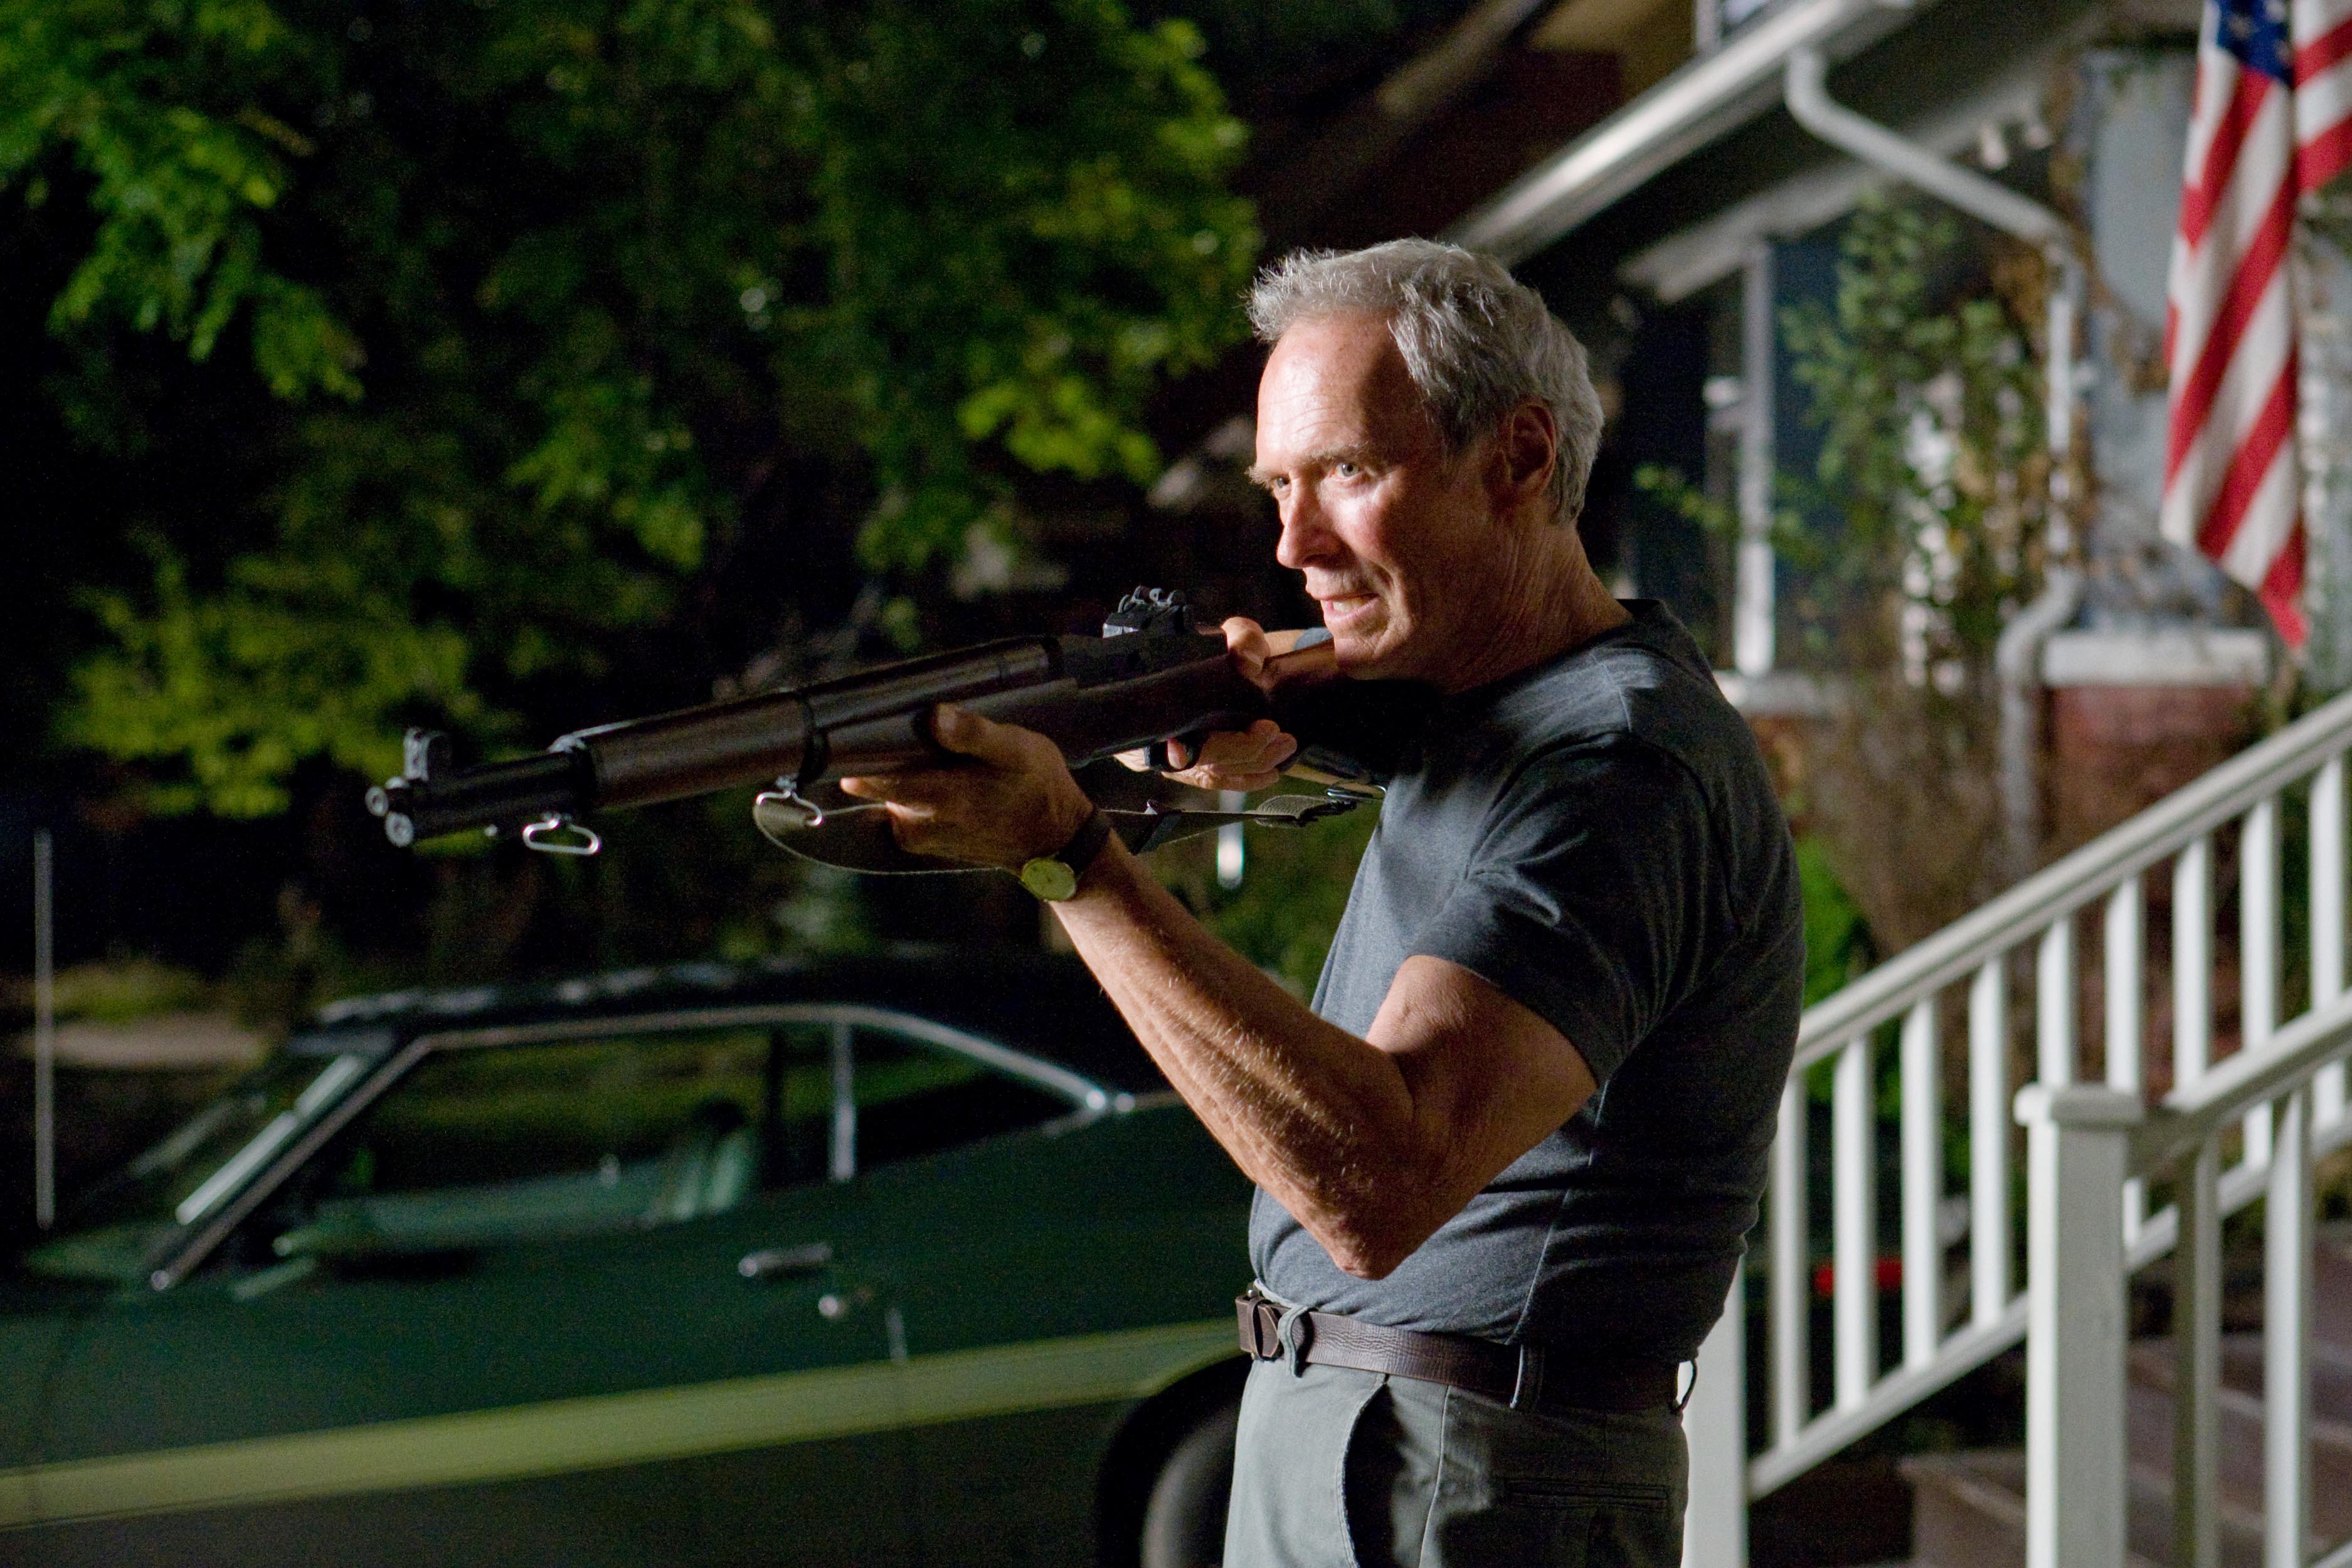 Eastwood’s widowed Korean War veteran in ‘Gran Torino’ (2008) isn’t that far removed from the vengeful outlaw he played in ‘Unforgiven’ (1992) or from his leading role in ‘Dirty Harry’ (1971)